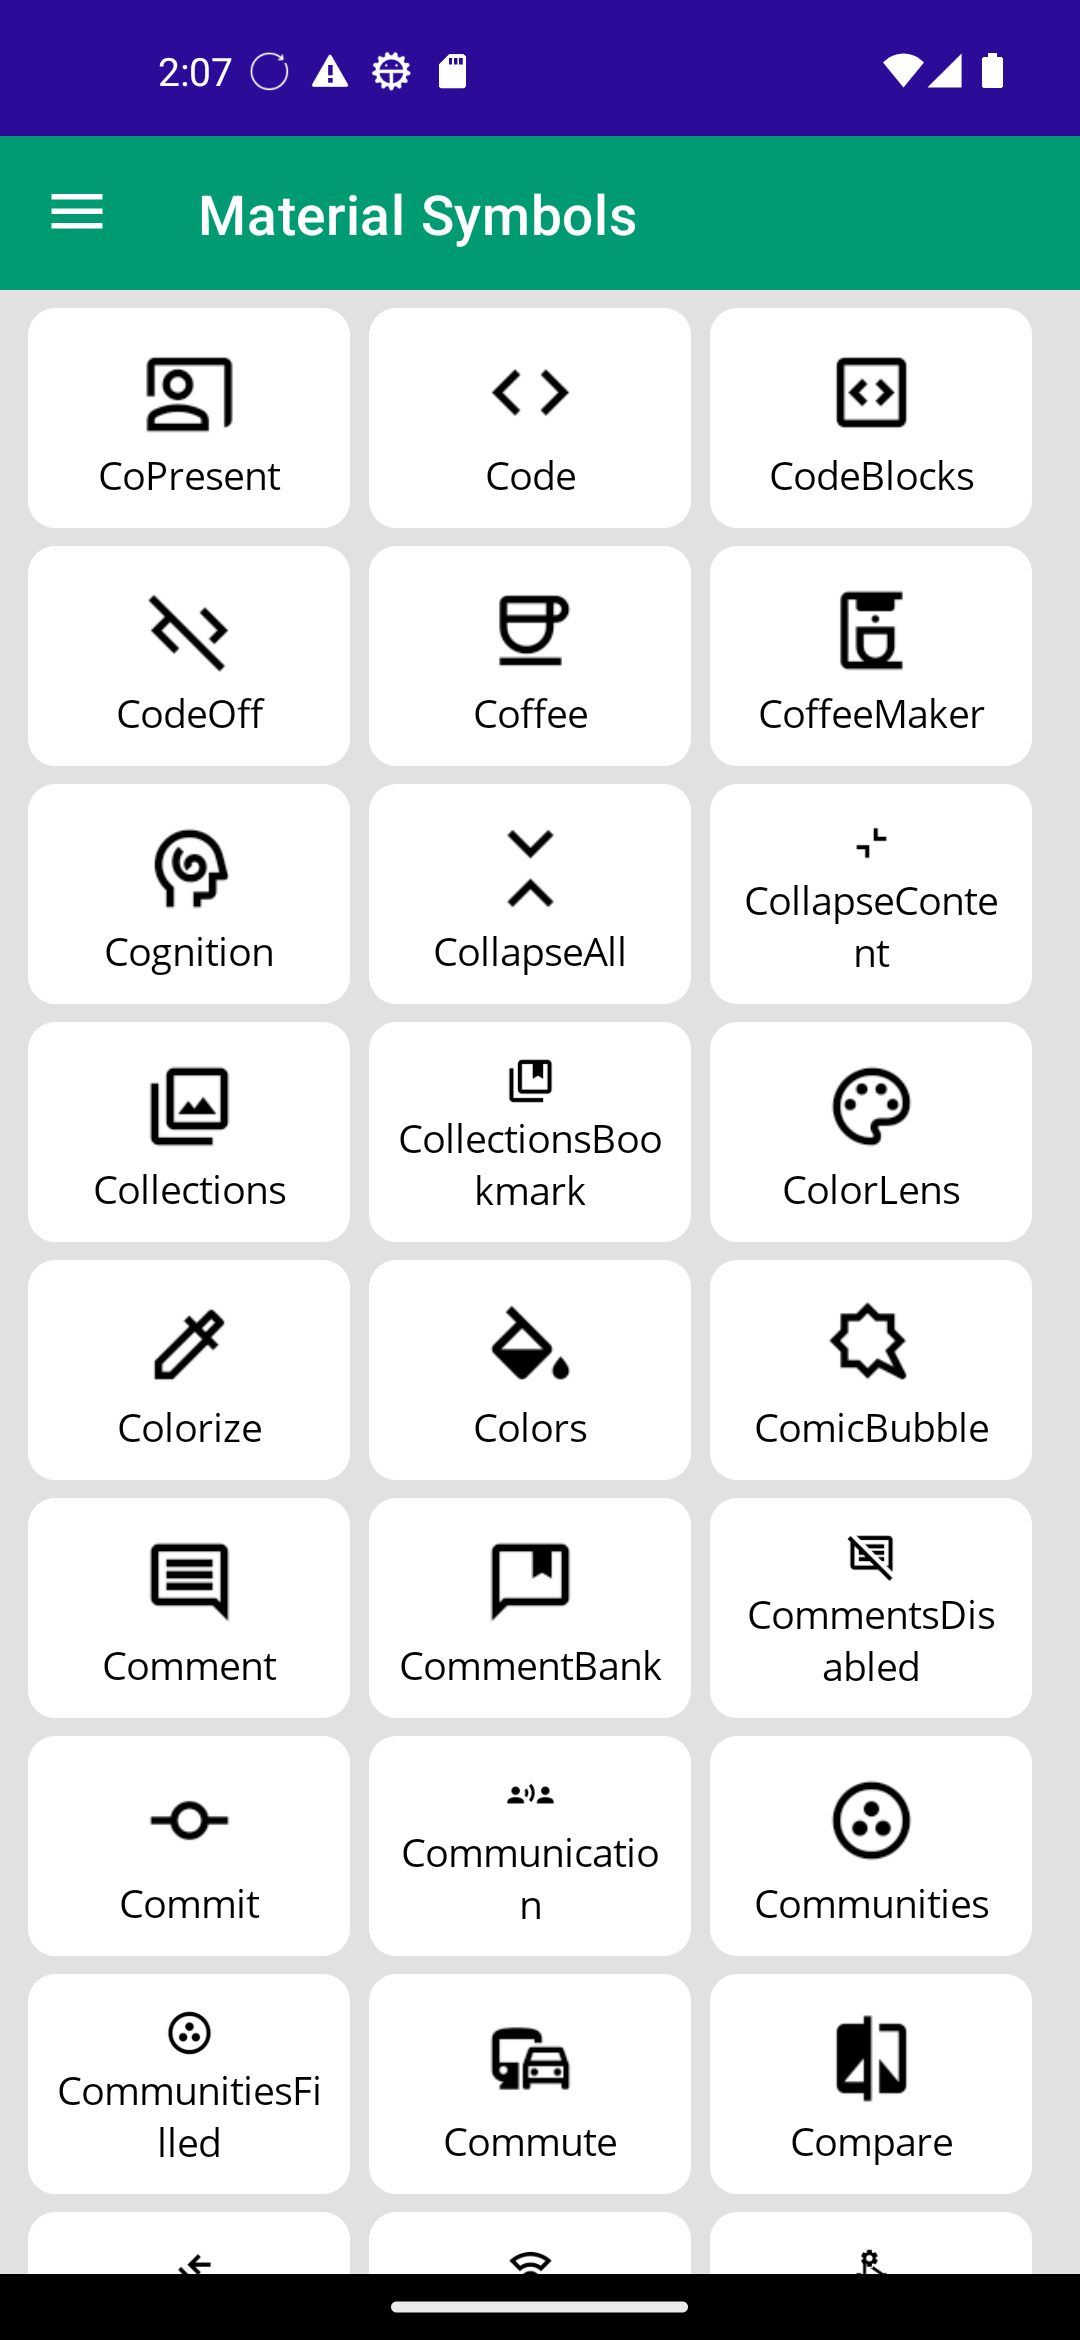 The material symbols page on iOS